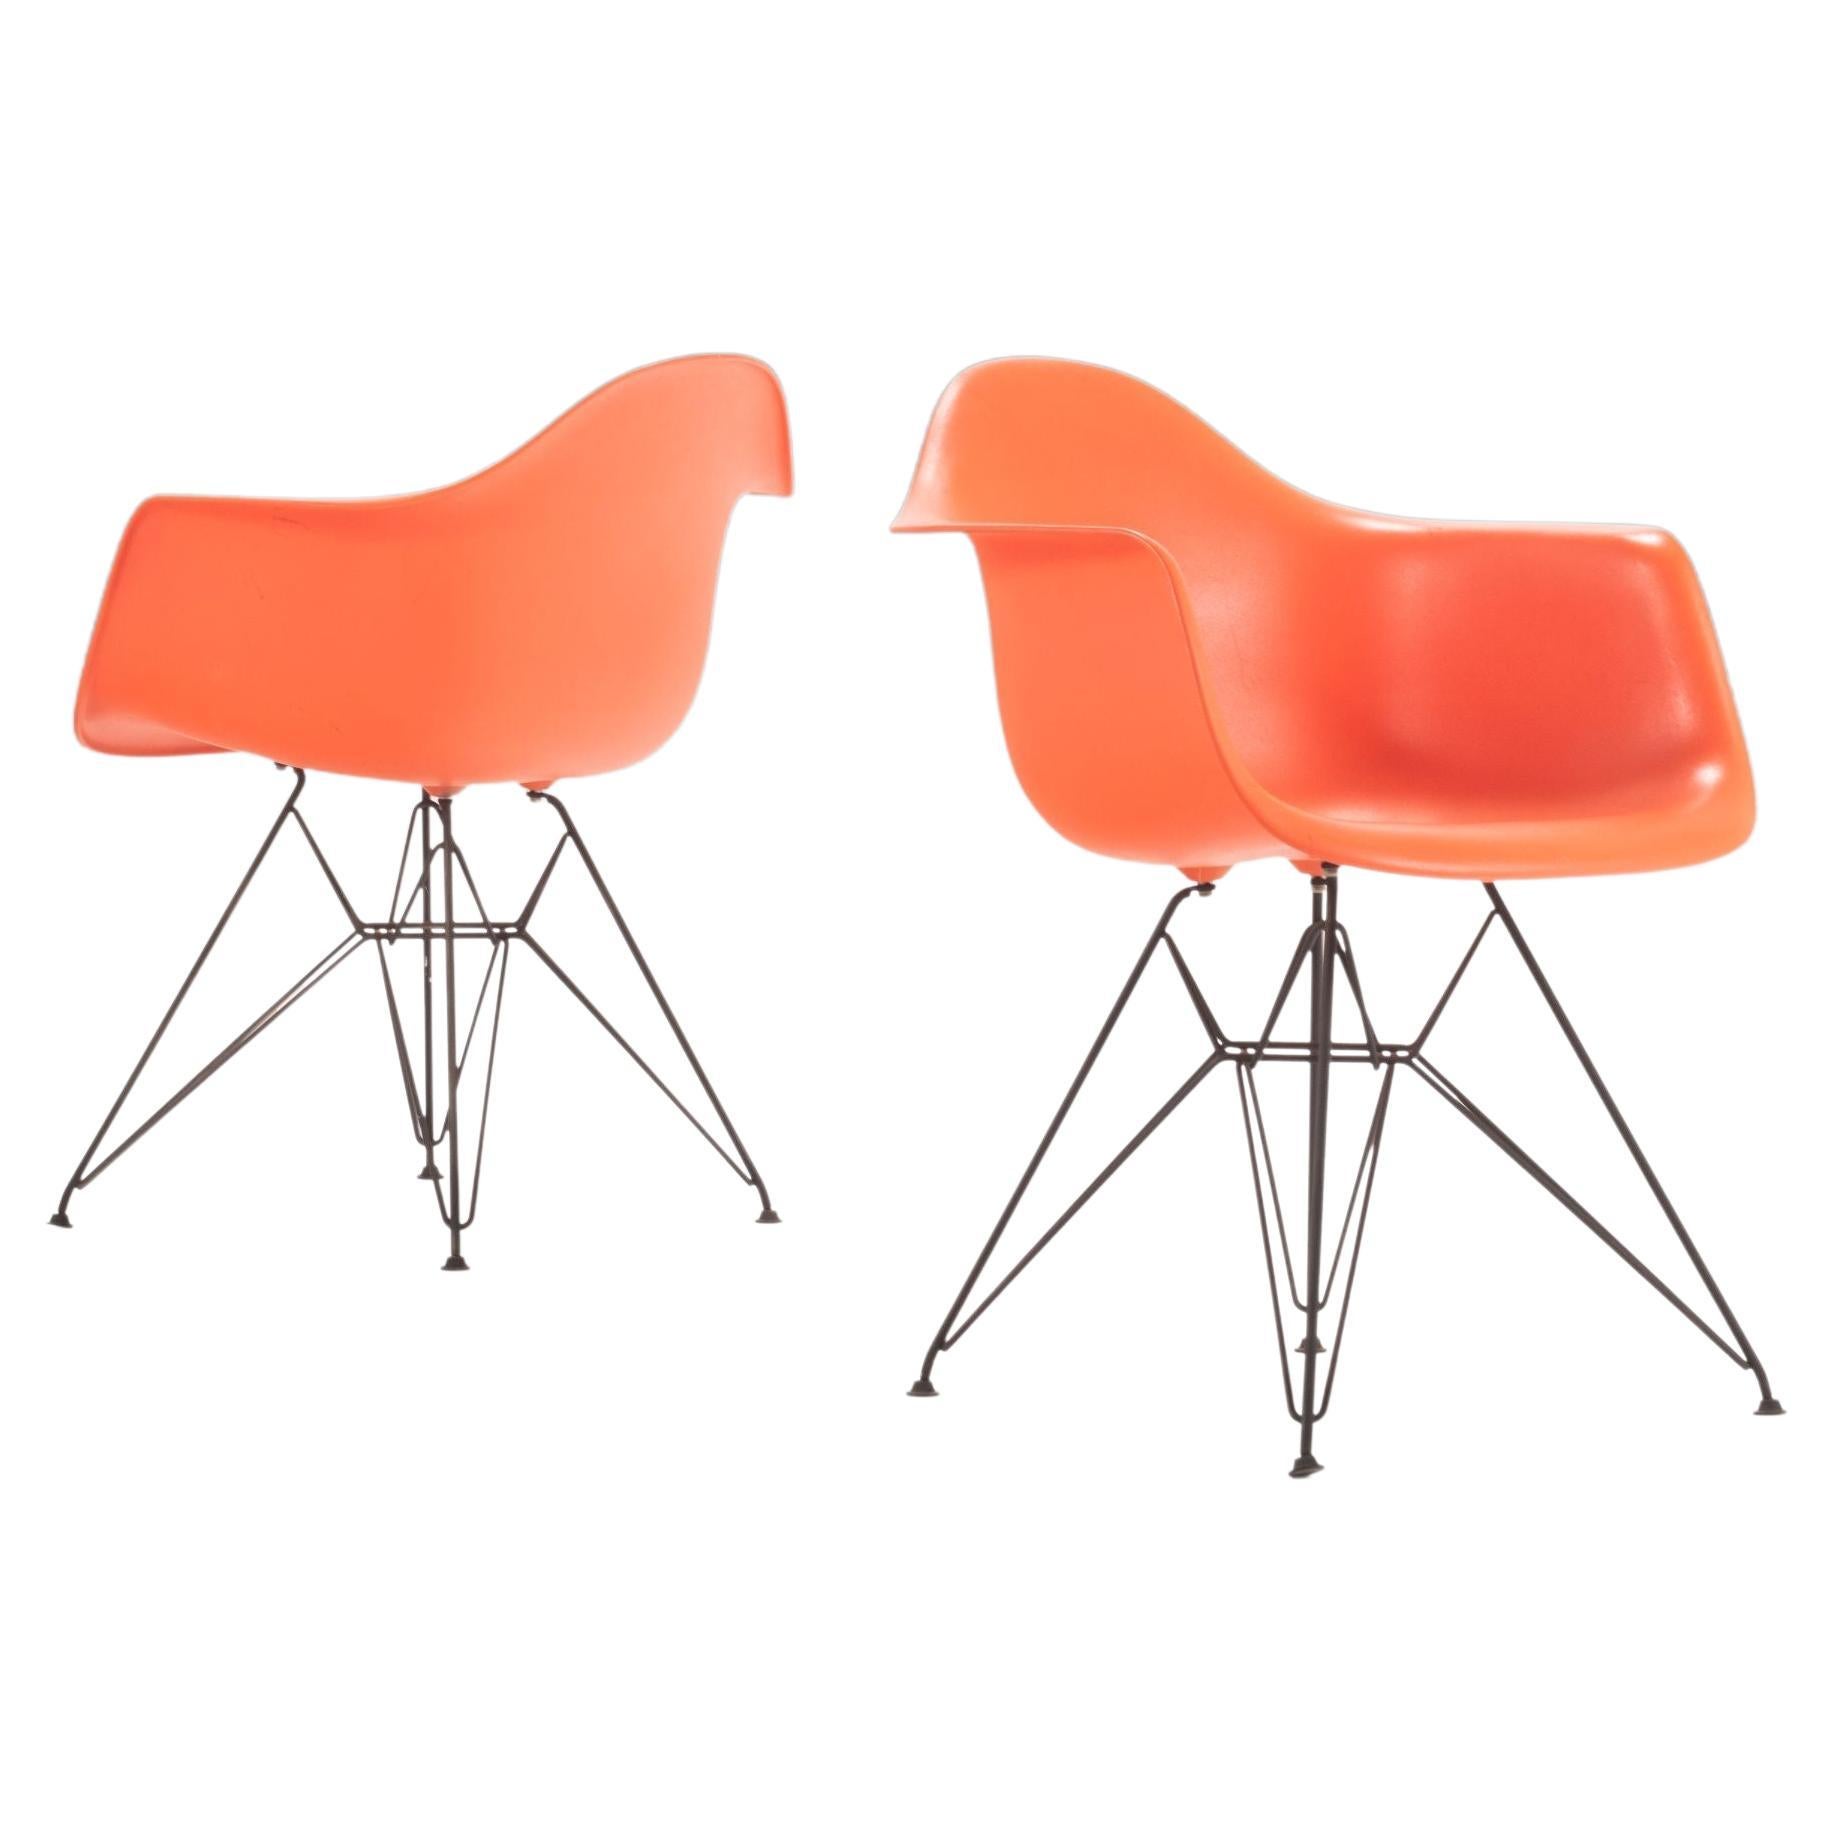 Set of Two '2' Charles & Ray Eames for Herman Miller DAR Chairs w/ Eiffel Bases